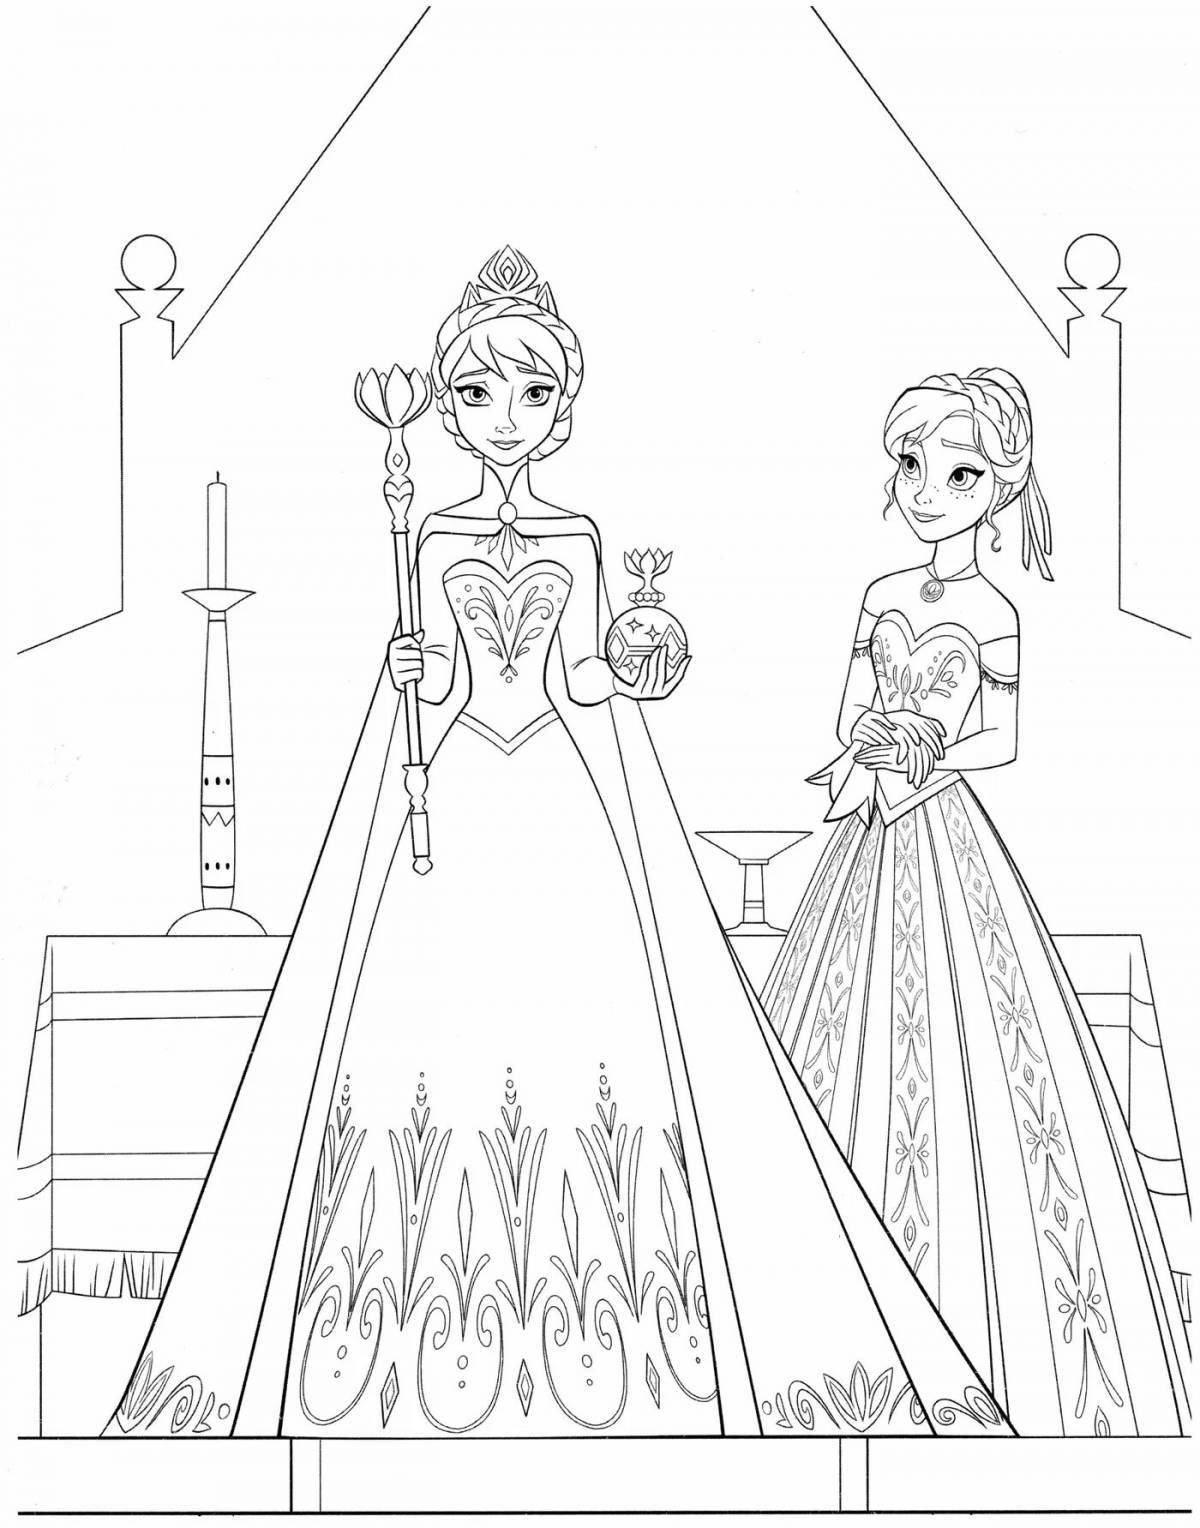 Elsa and anna's generous coloring